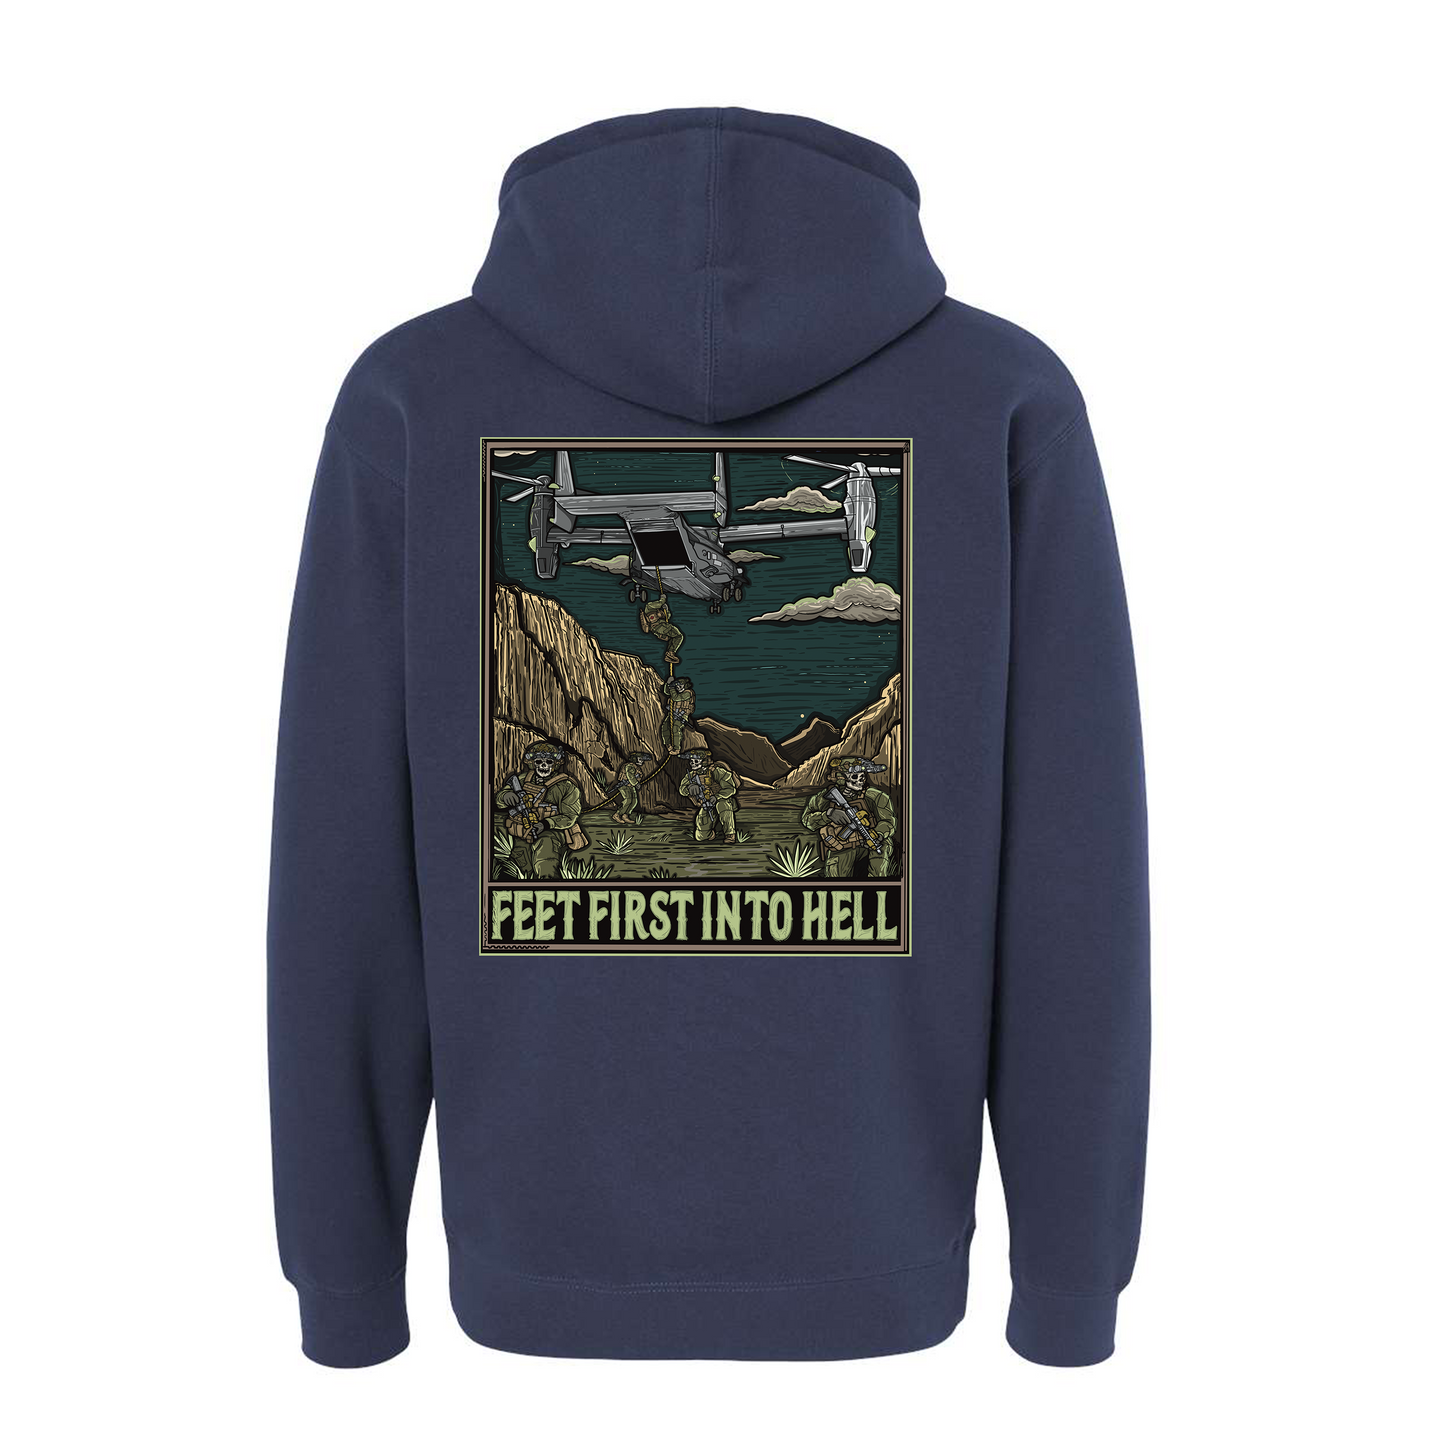 The Valley Hoodie